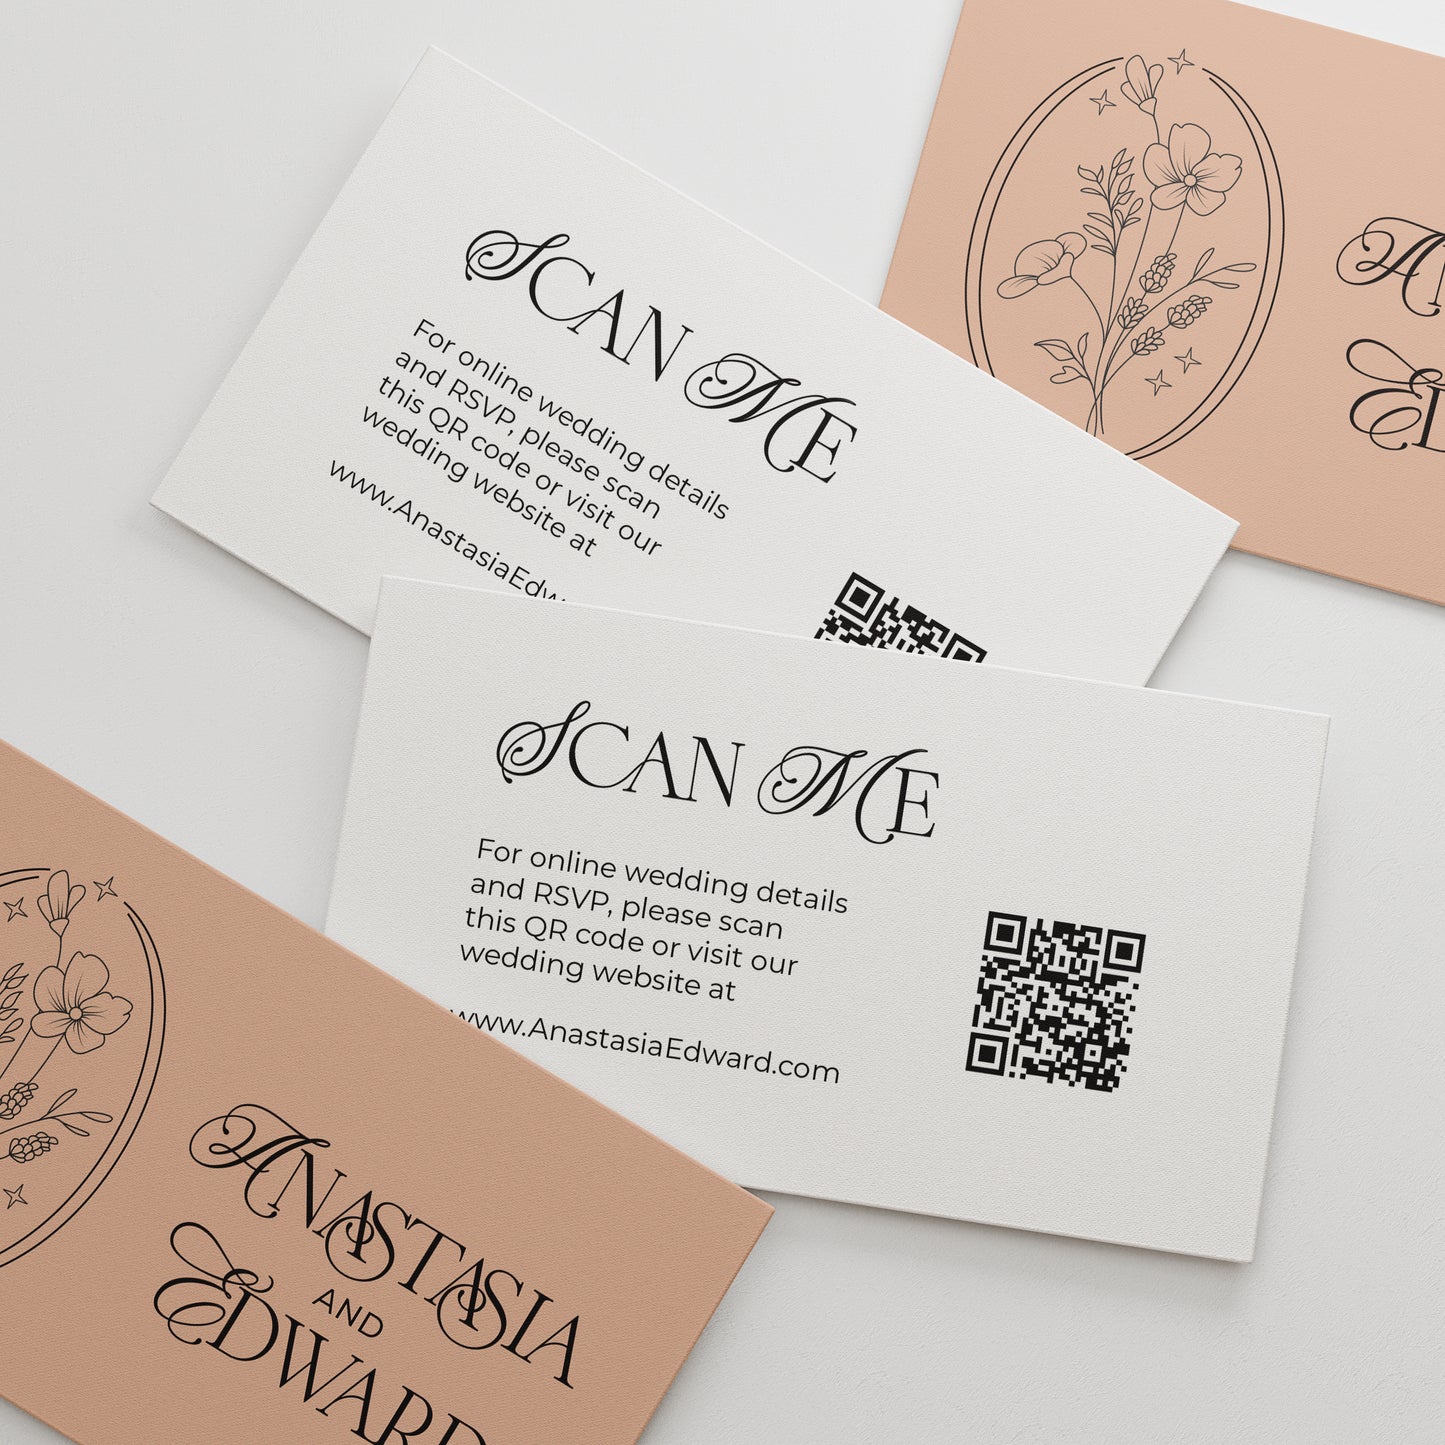 Luxury floral personalized wedding website cards from XOXOKristen, featuring a QR code, stylish calligraphy, and a variety of foil text printing options.